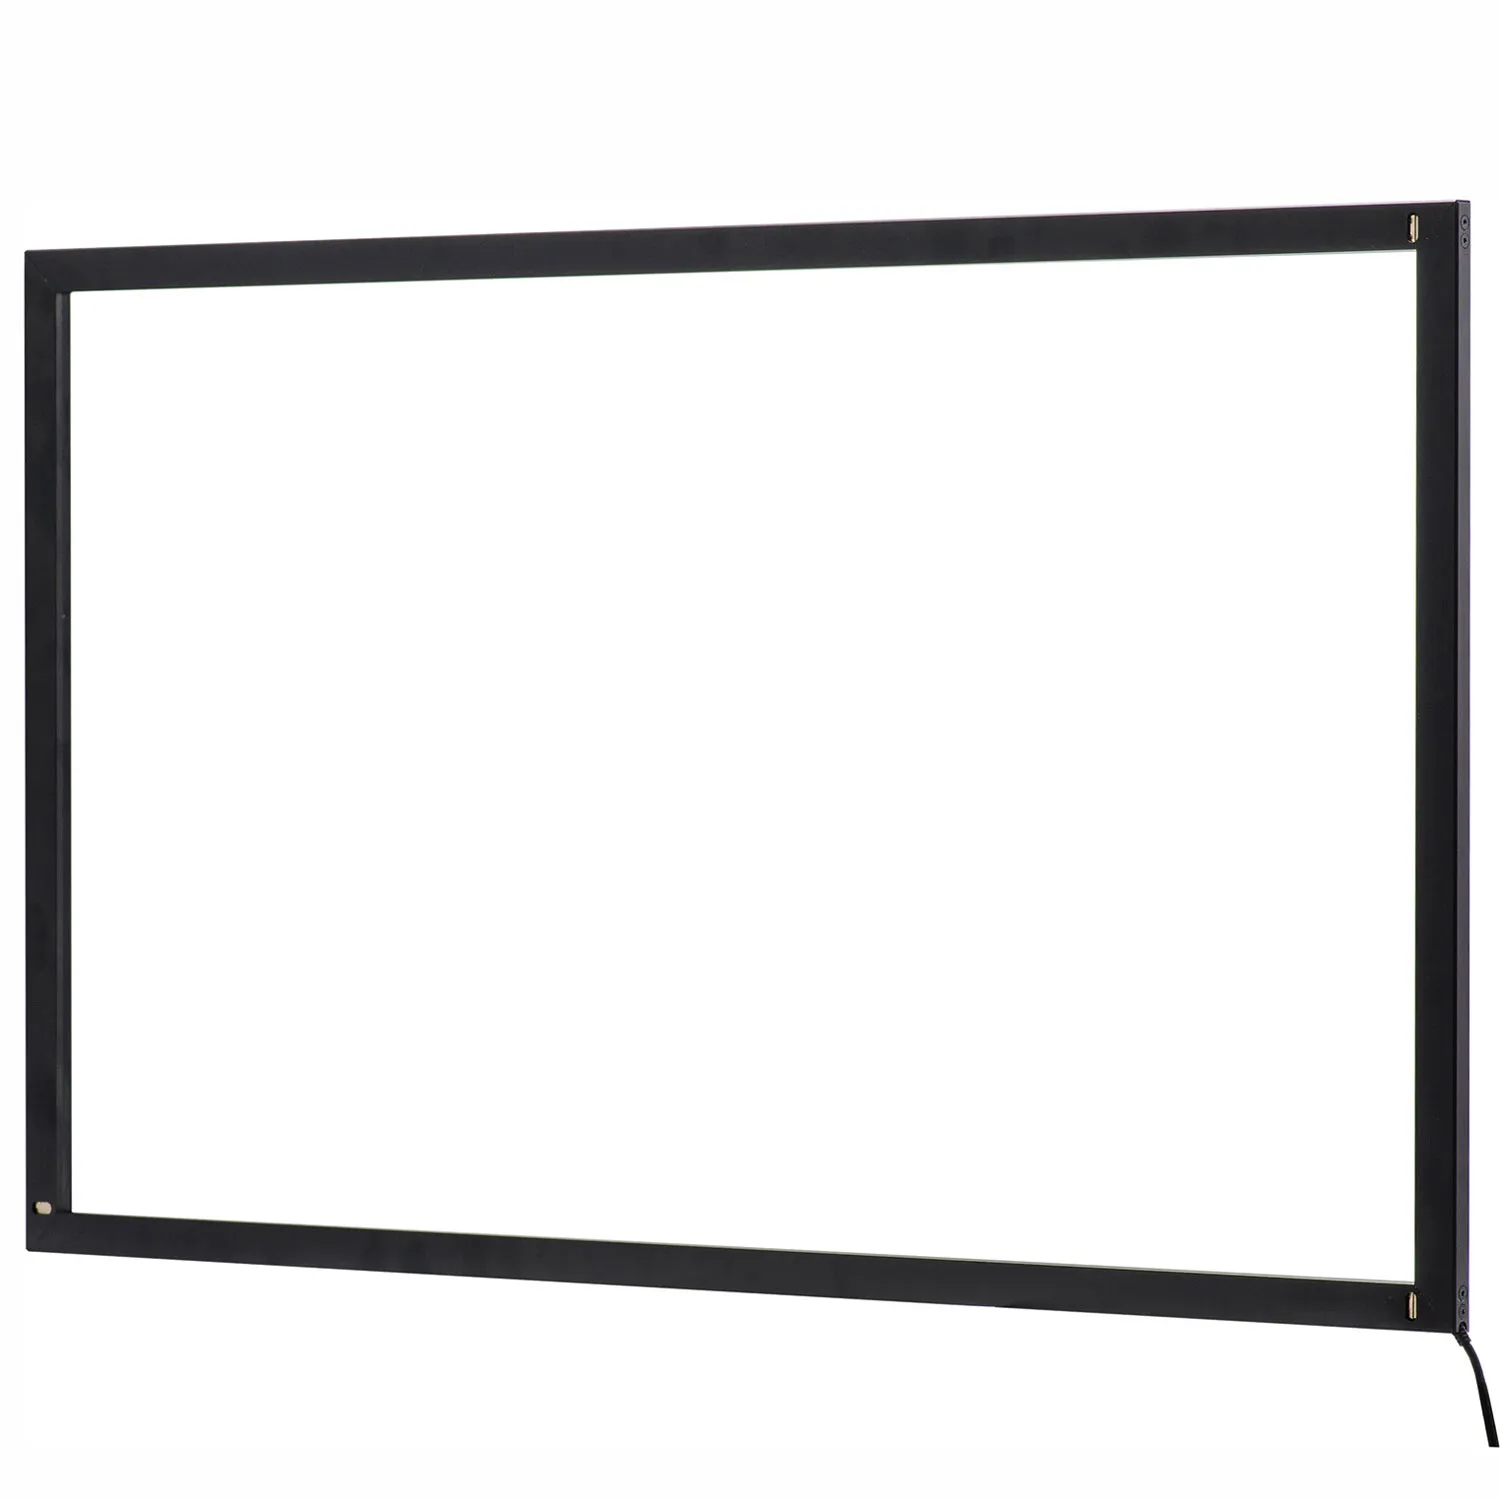 Touch frame Keetouch GmbH 65" KP-650-IP2S0U1